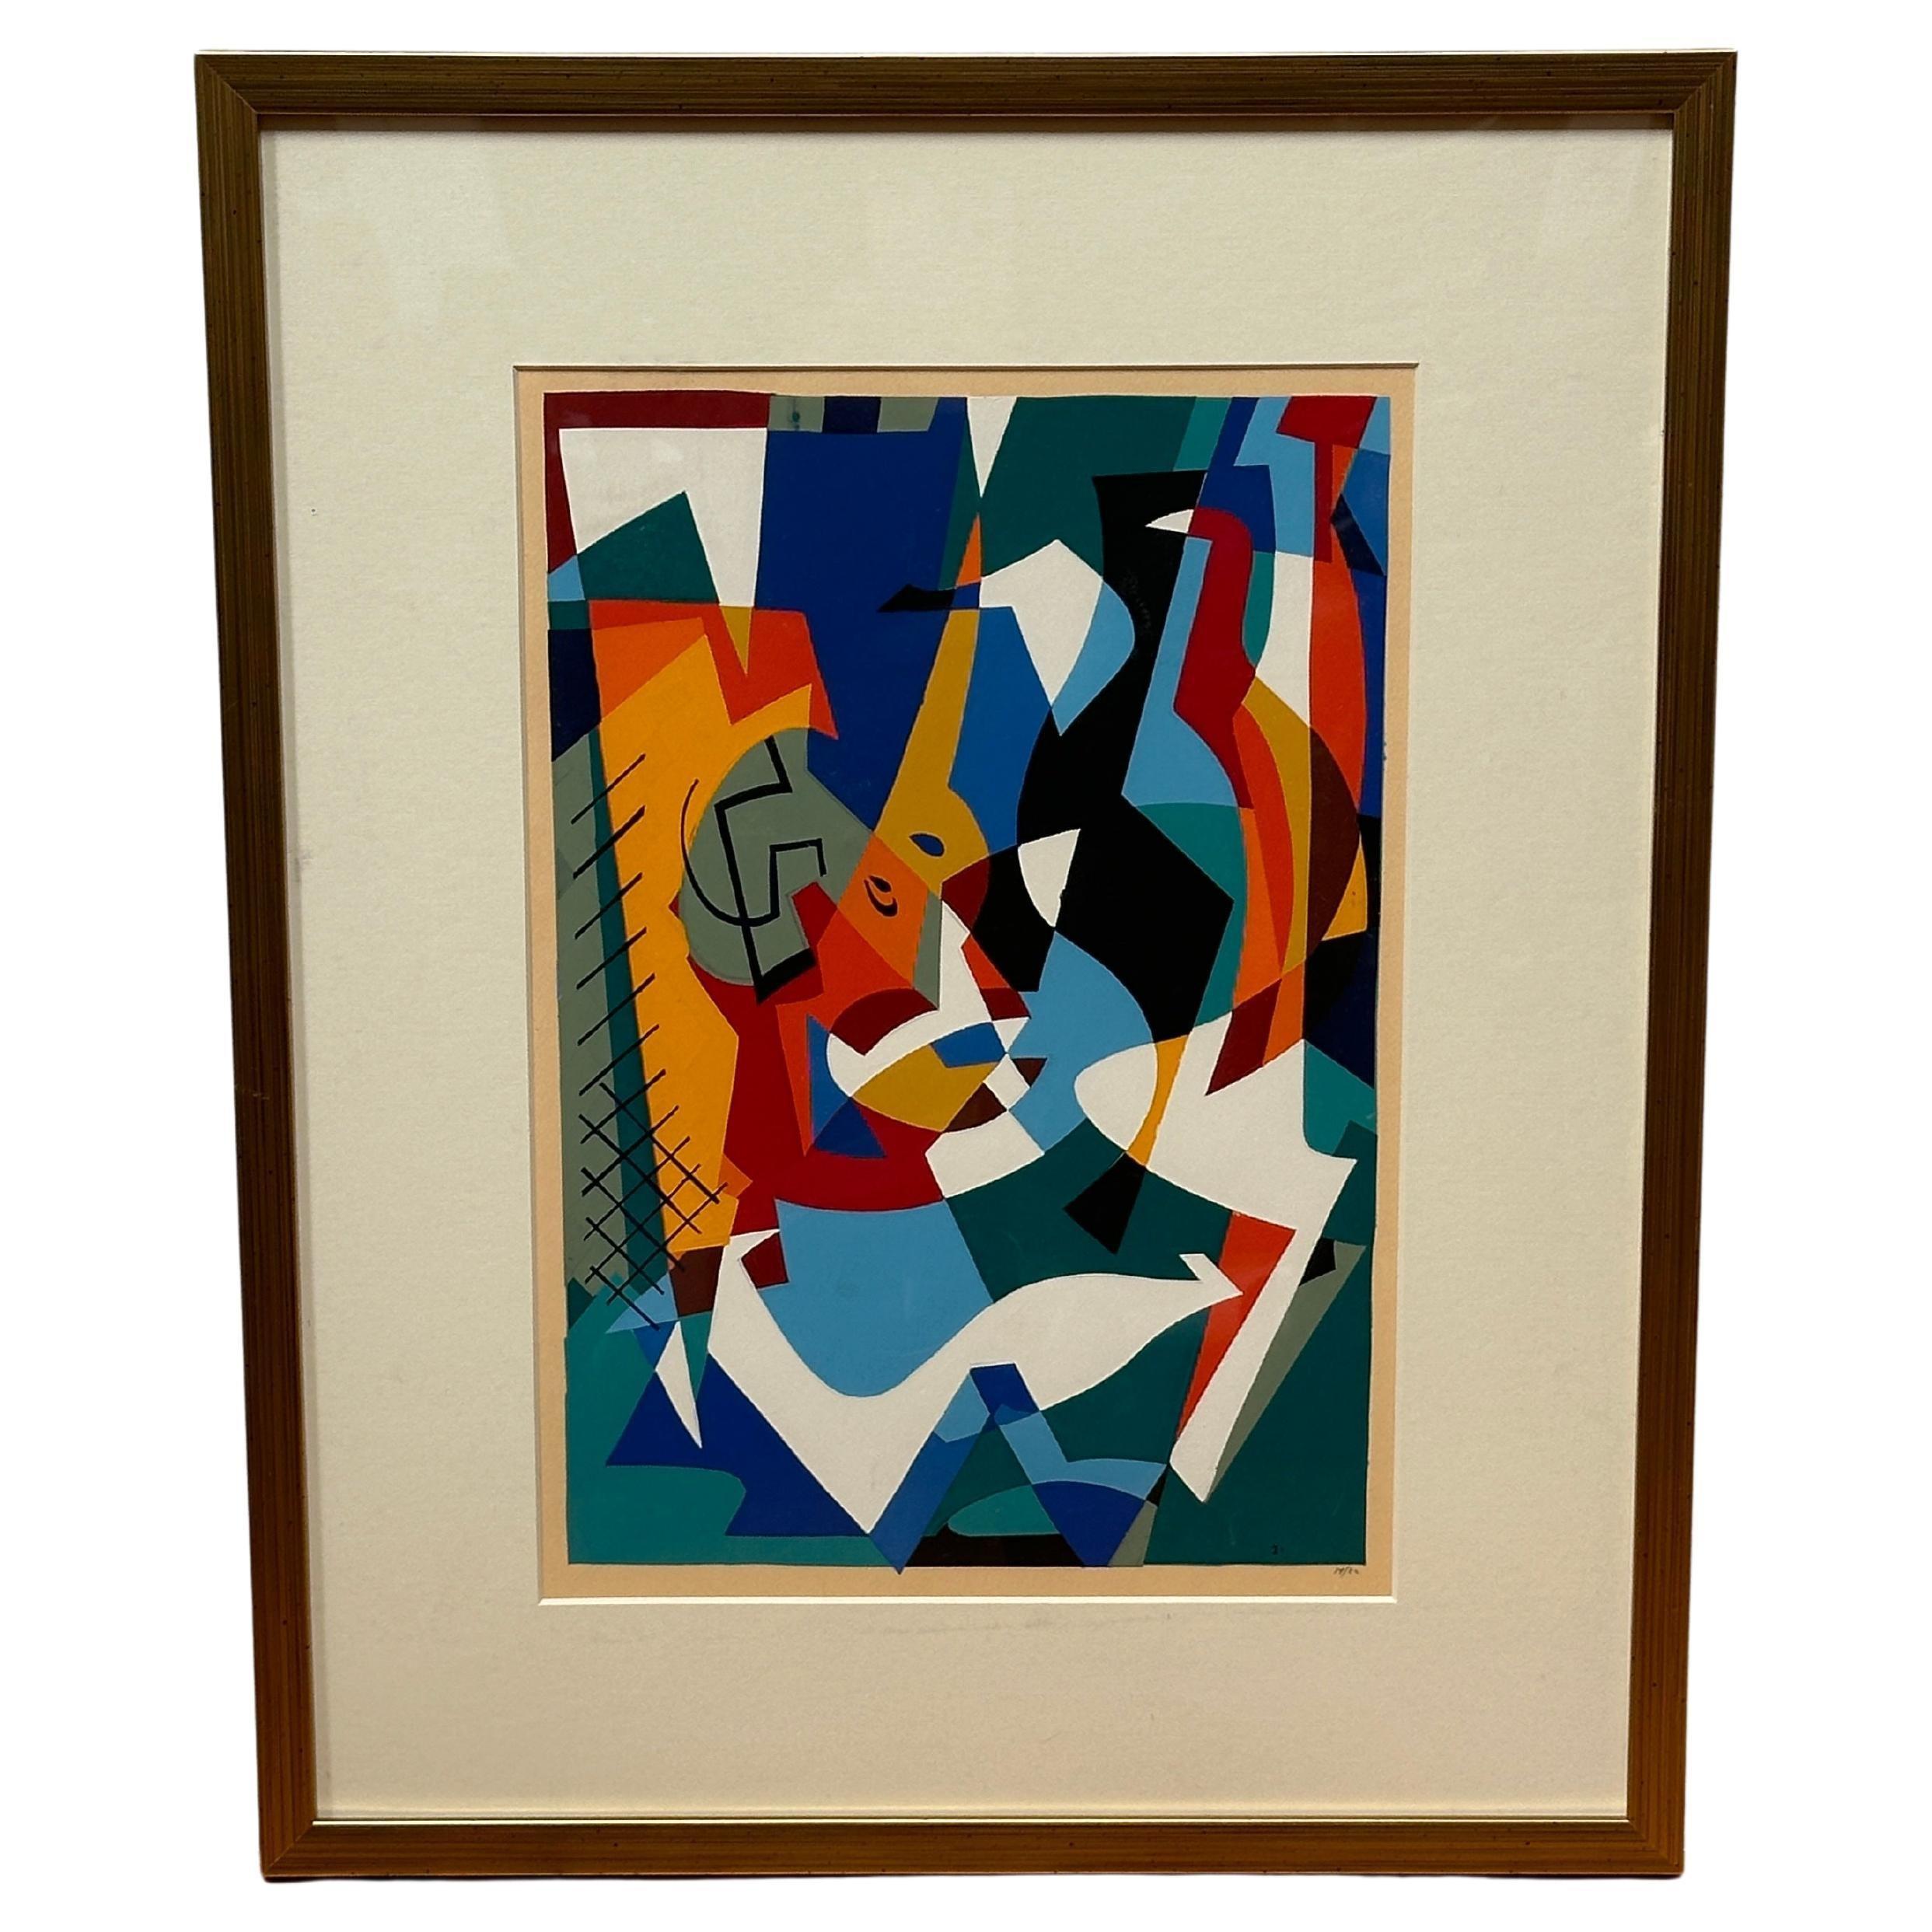 Richard Proctor pays tribute to painters like the cubist Albert Gleizes in this abstract lithograph numbered 14/30. The artist uses the principle of the kaleidoscope. He turns traditionally familiar shapes or forms into an abstract take, creating a